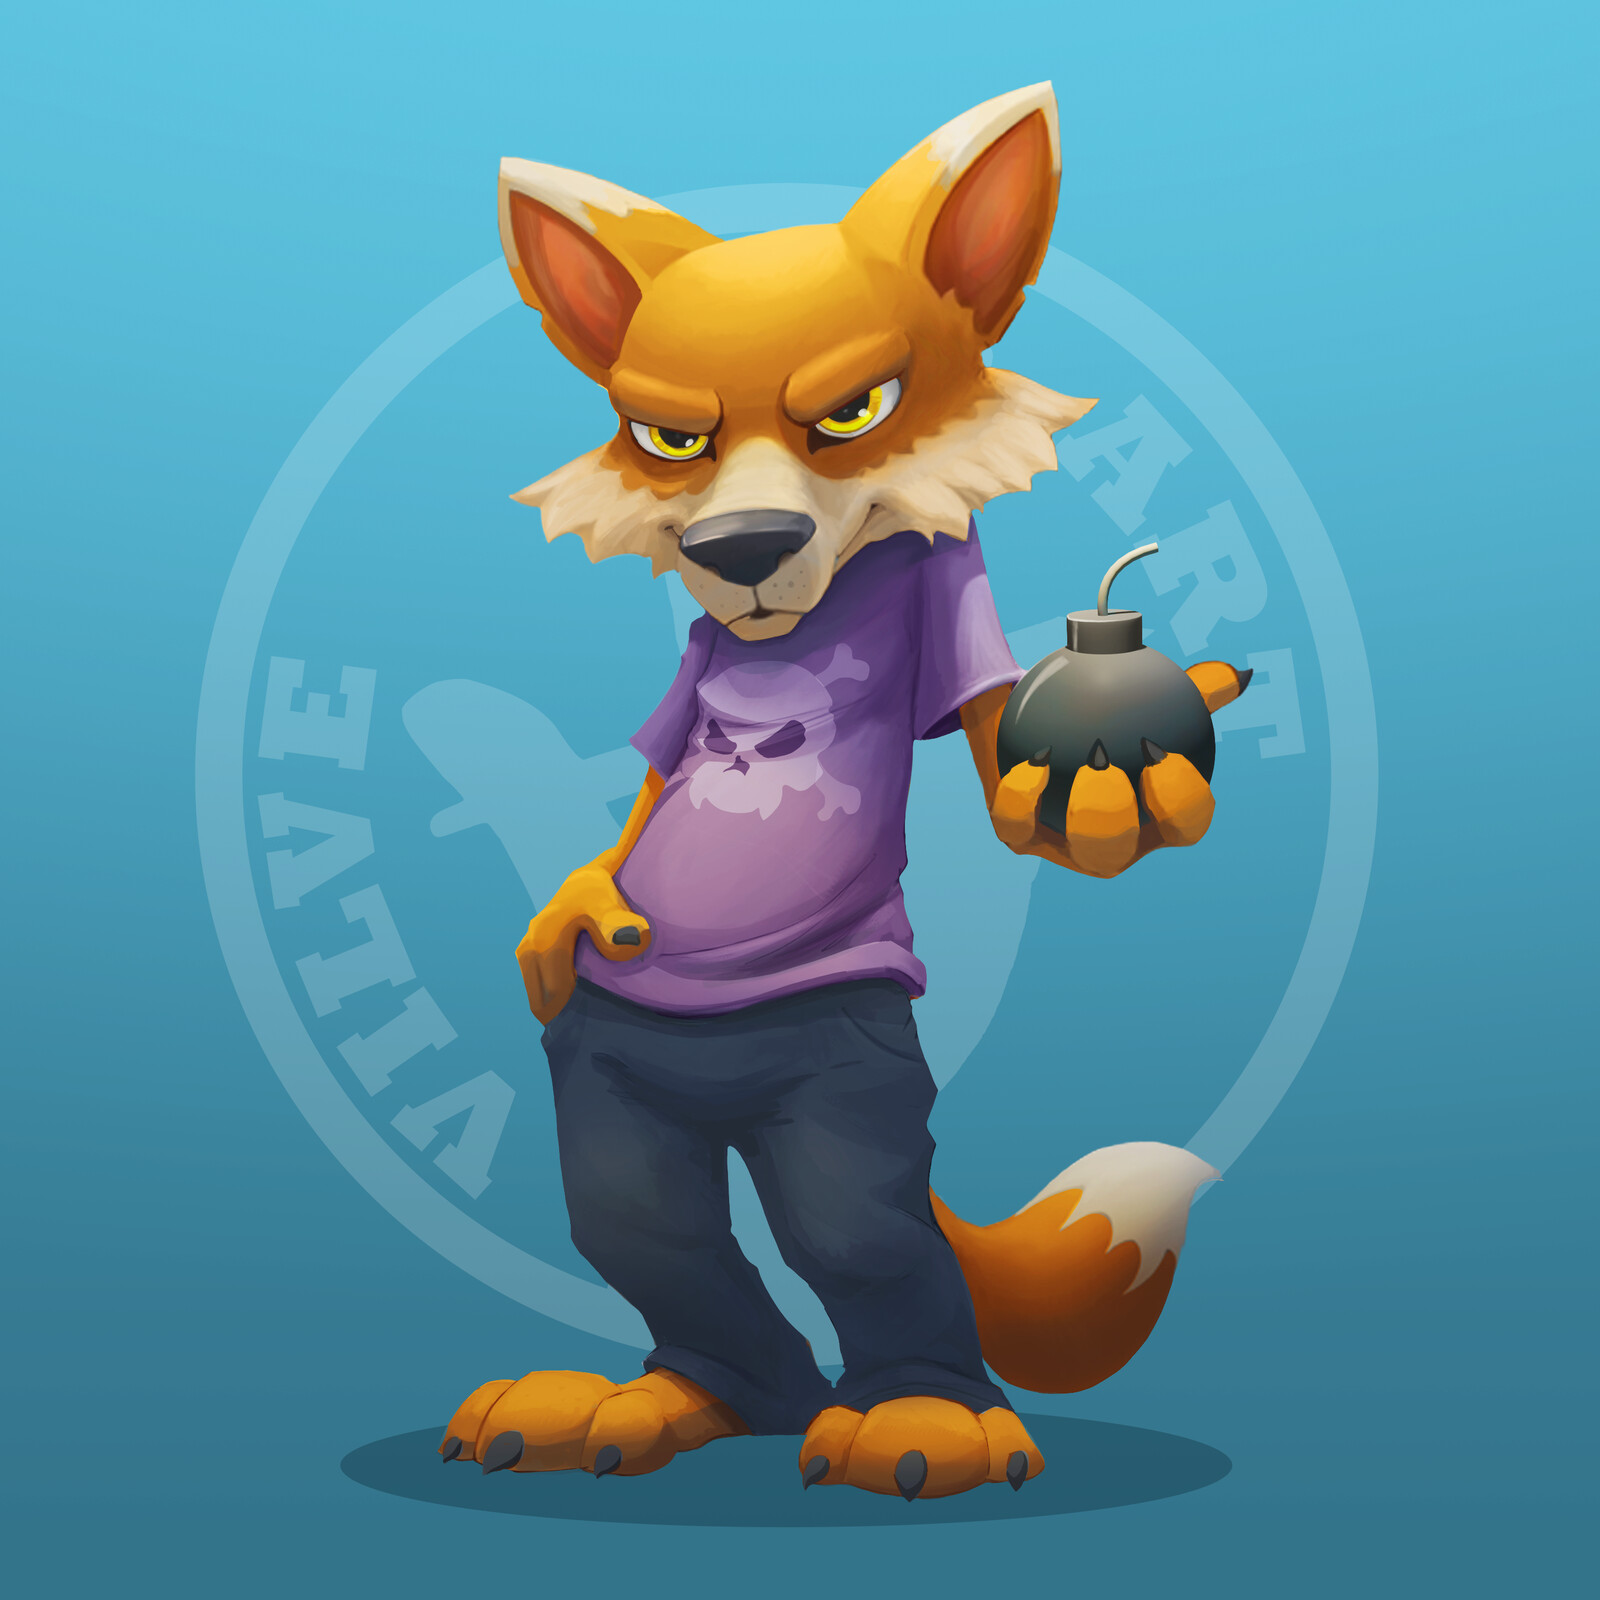 "Crafty the Fox". A member for the Animal Street Gang series.